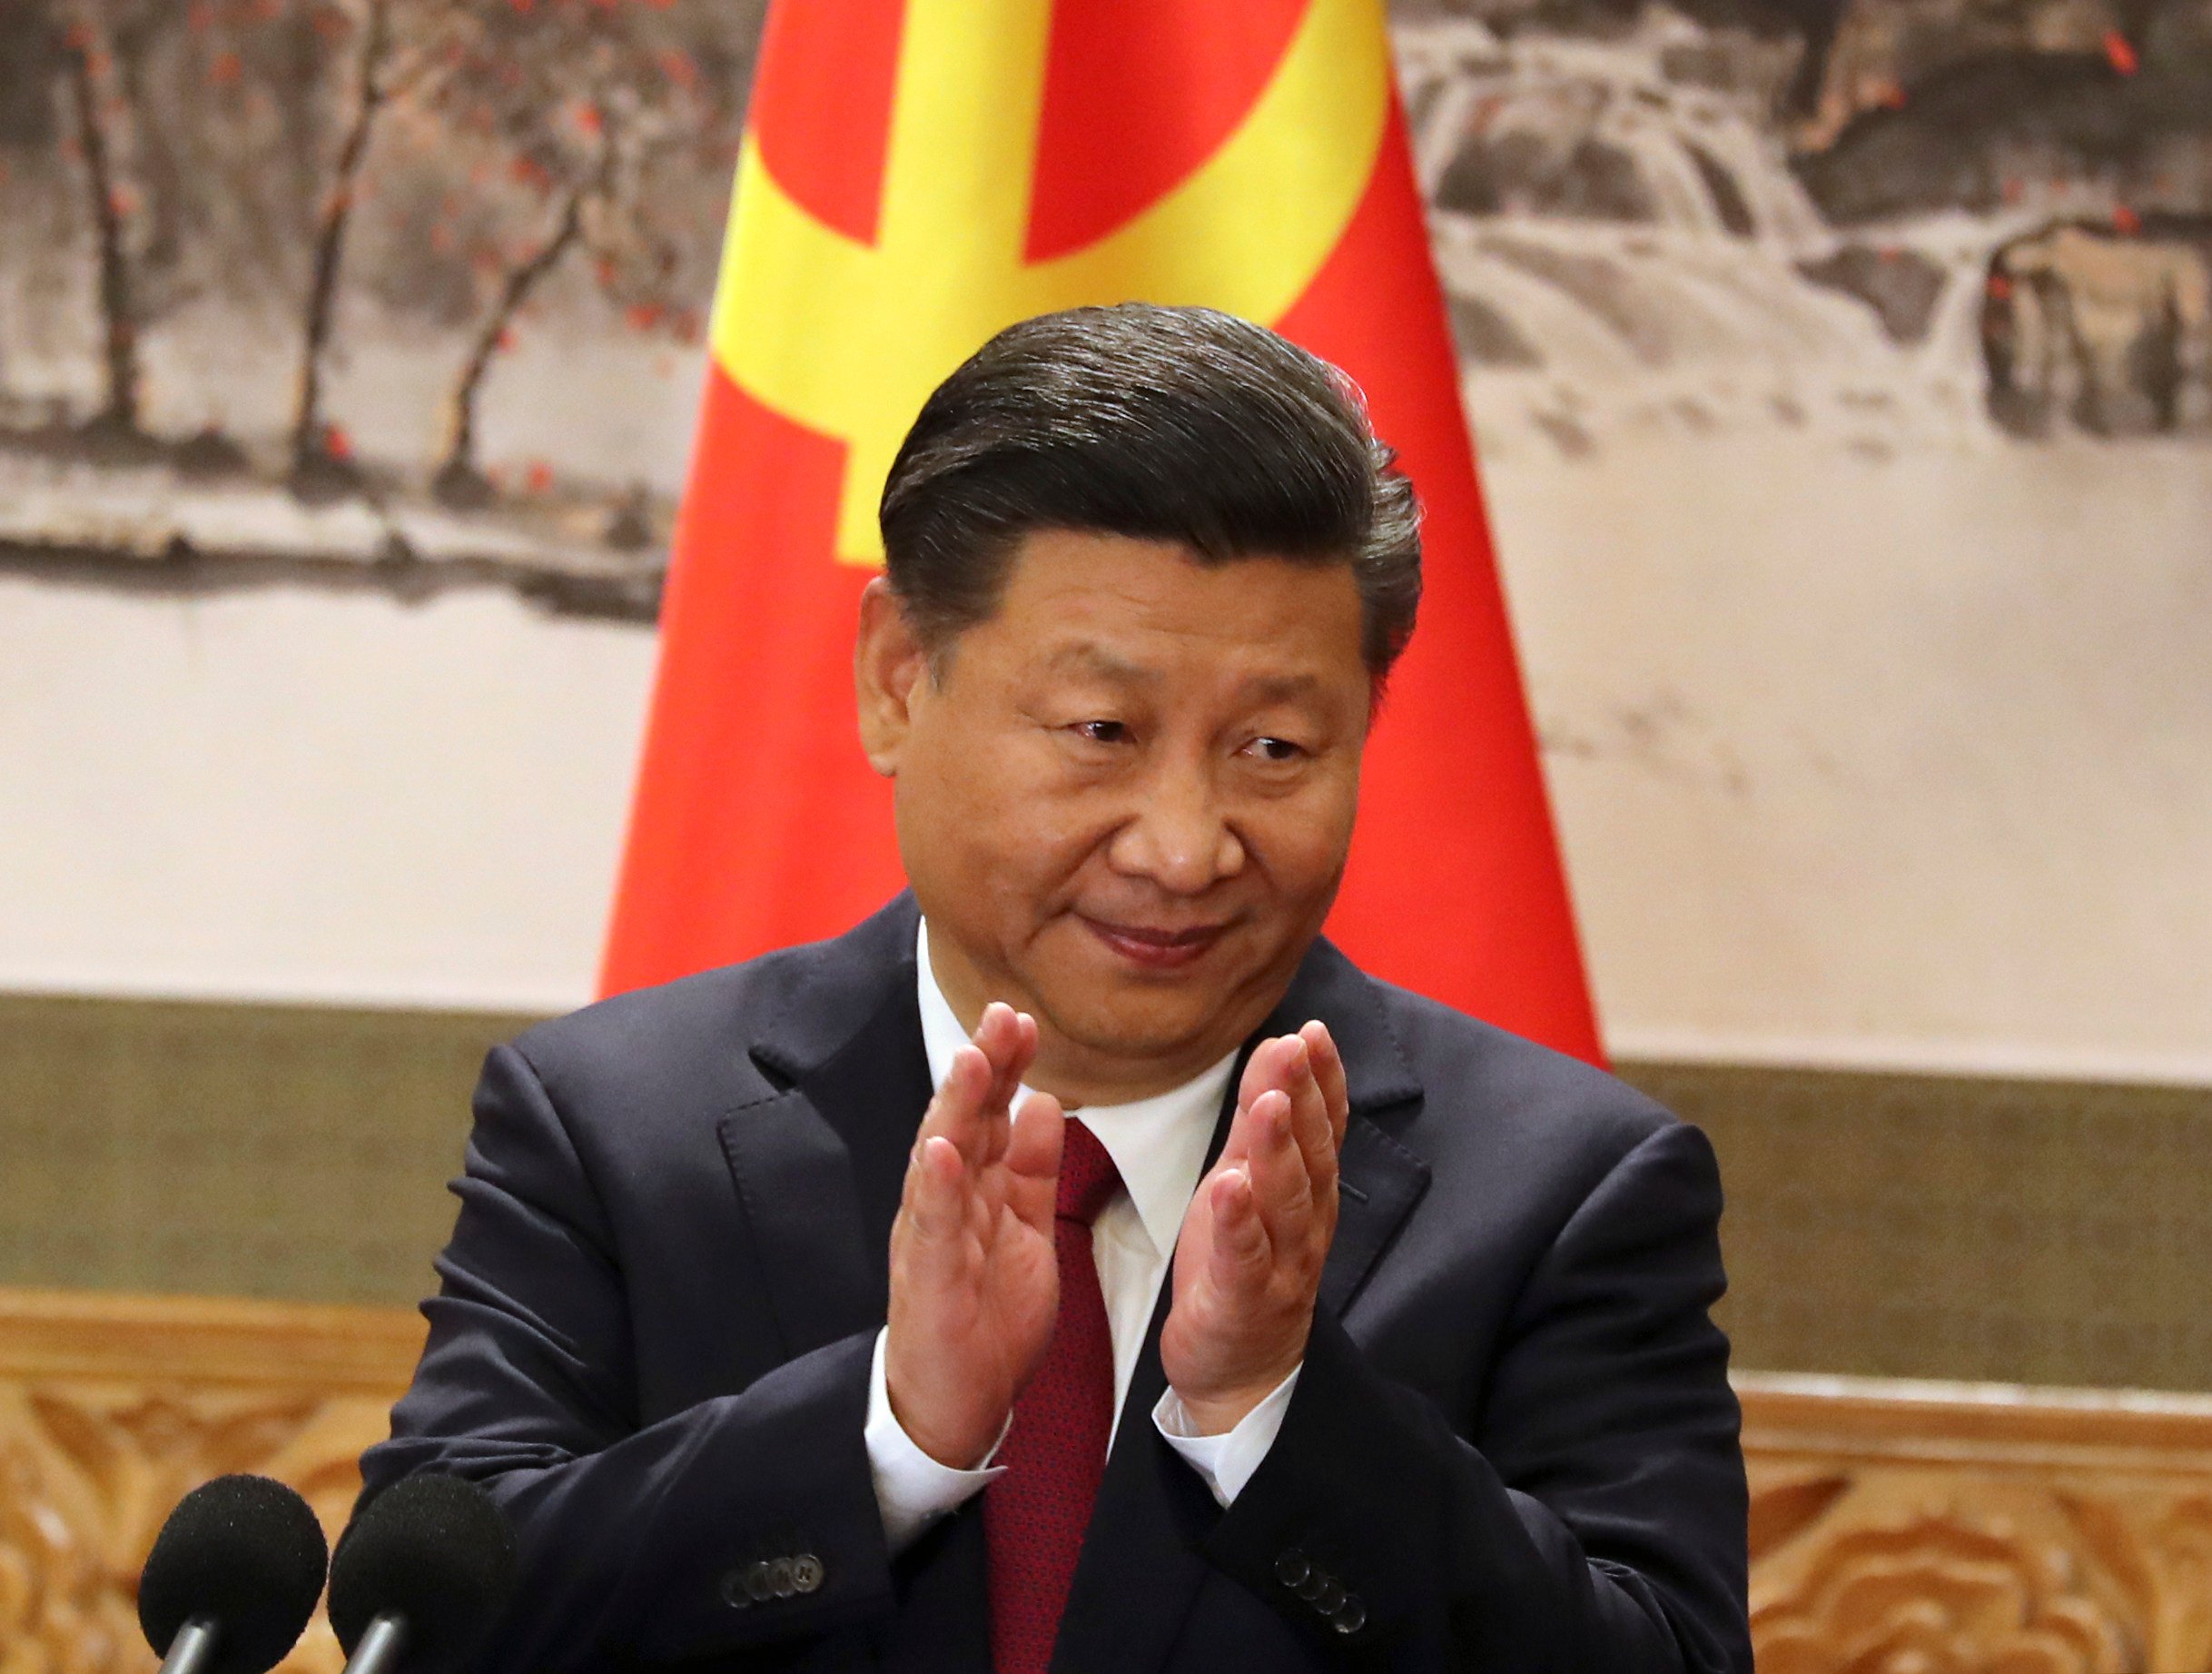 Chinese President Xi Jinping claps while addressing the media as he introduced new members of the Politburo Standing Committee on the final day of the 19th party congress at Beijing’s Great Hall of the People in 2017. Photo: AP